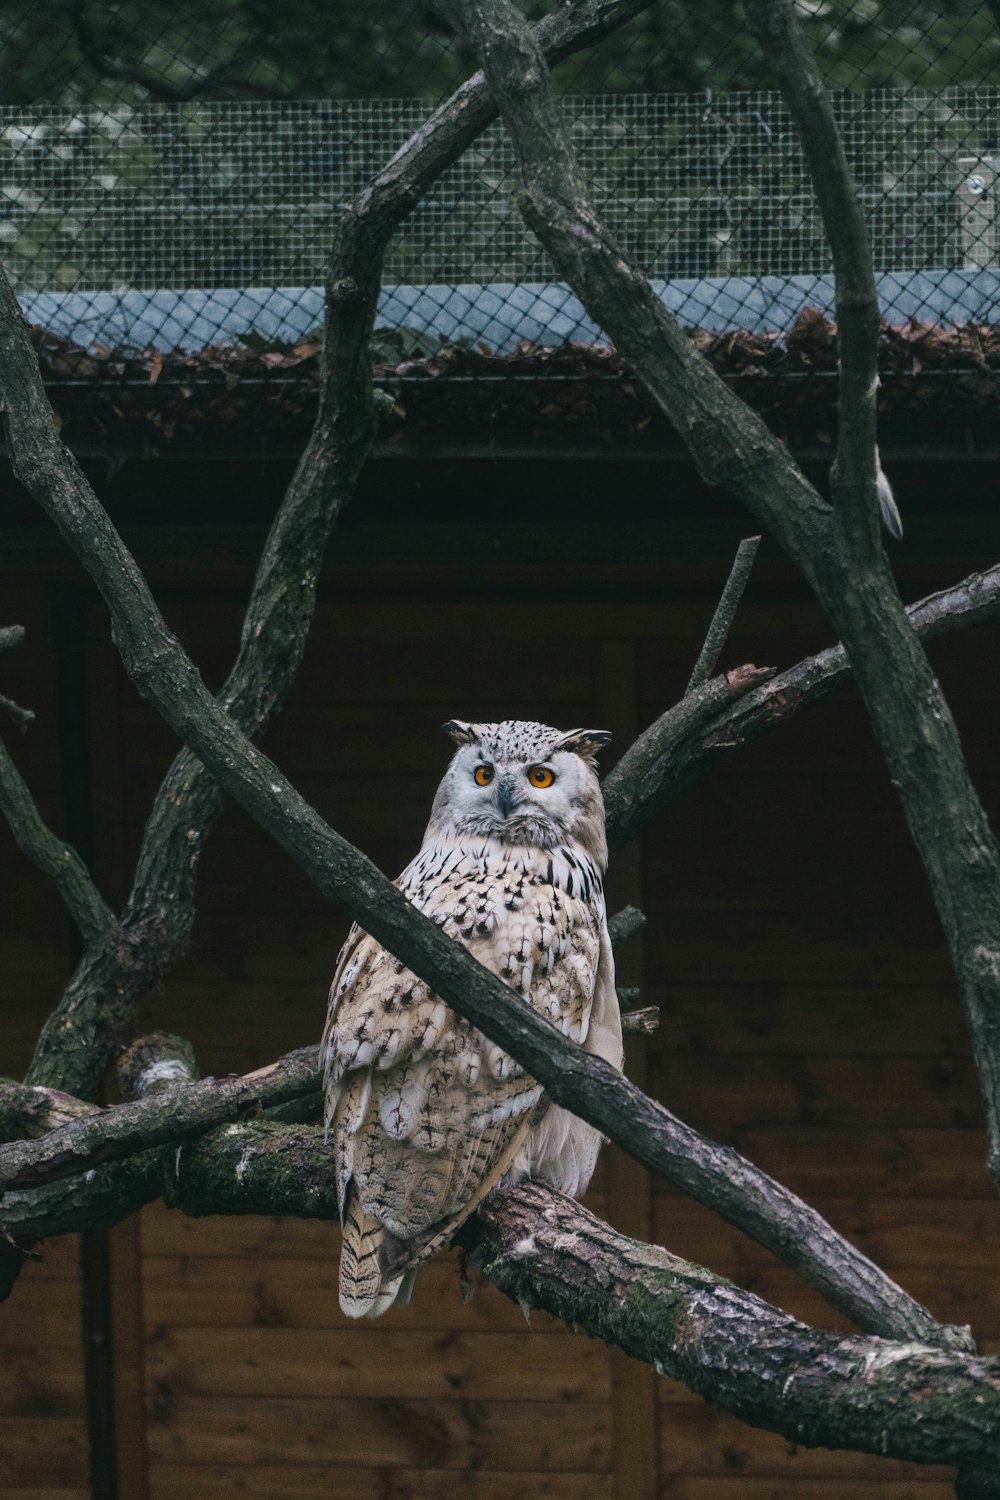 an owl is perched on a tree branch